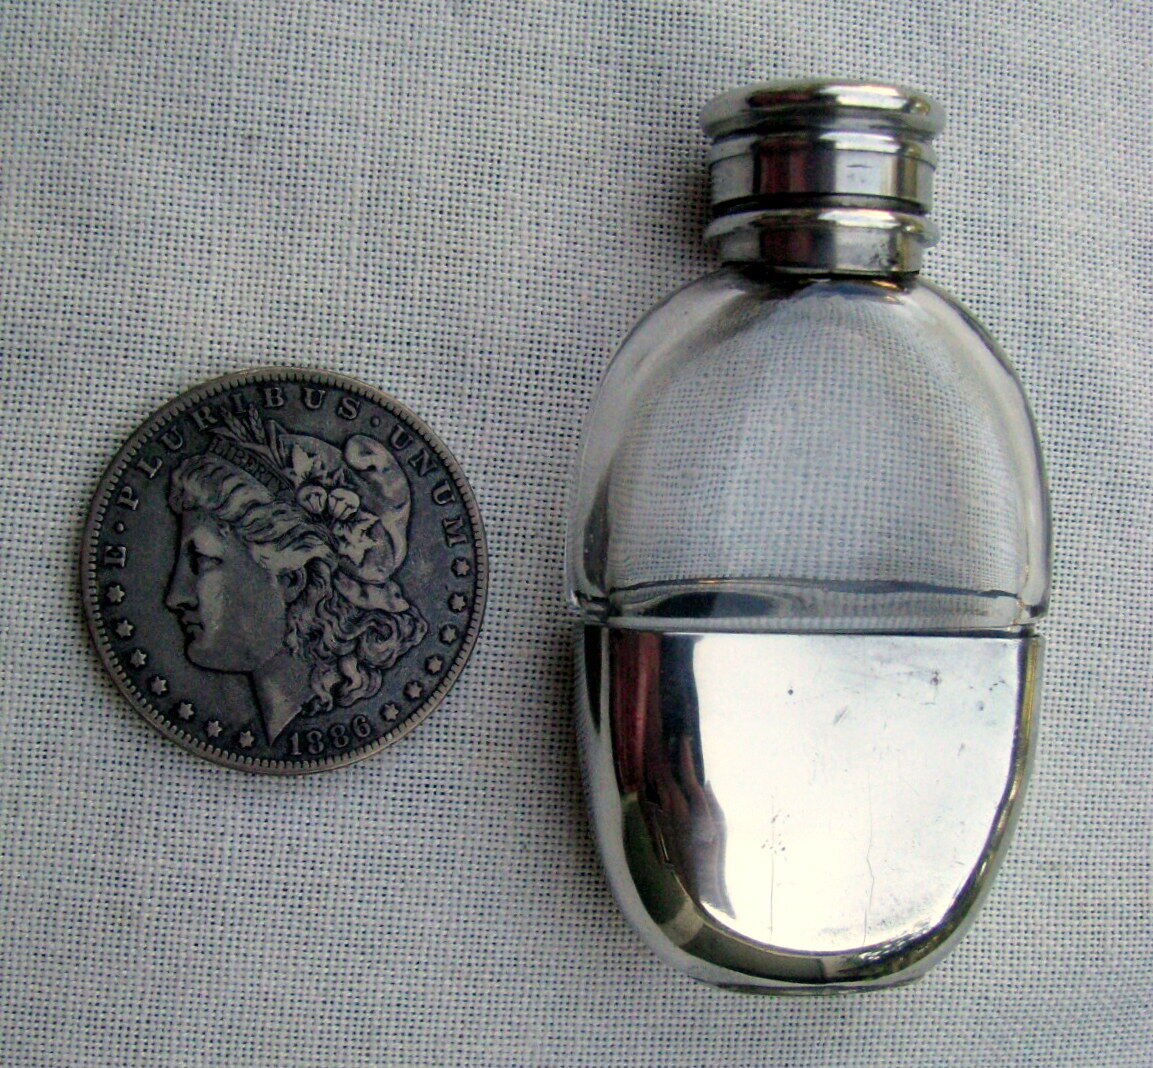 FINE SCARCE ANTIQUE SMALL GLASS POCKET NIPPER FLASK WITH CUP~1890s - EARLY 1900s